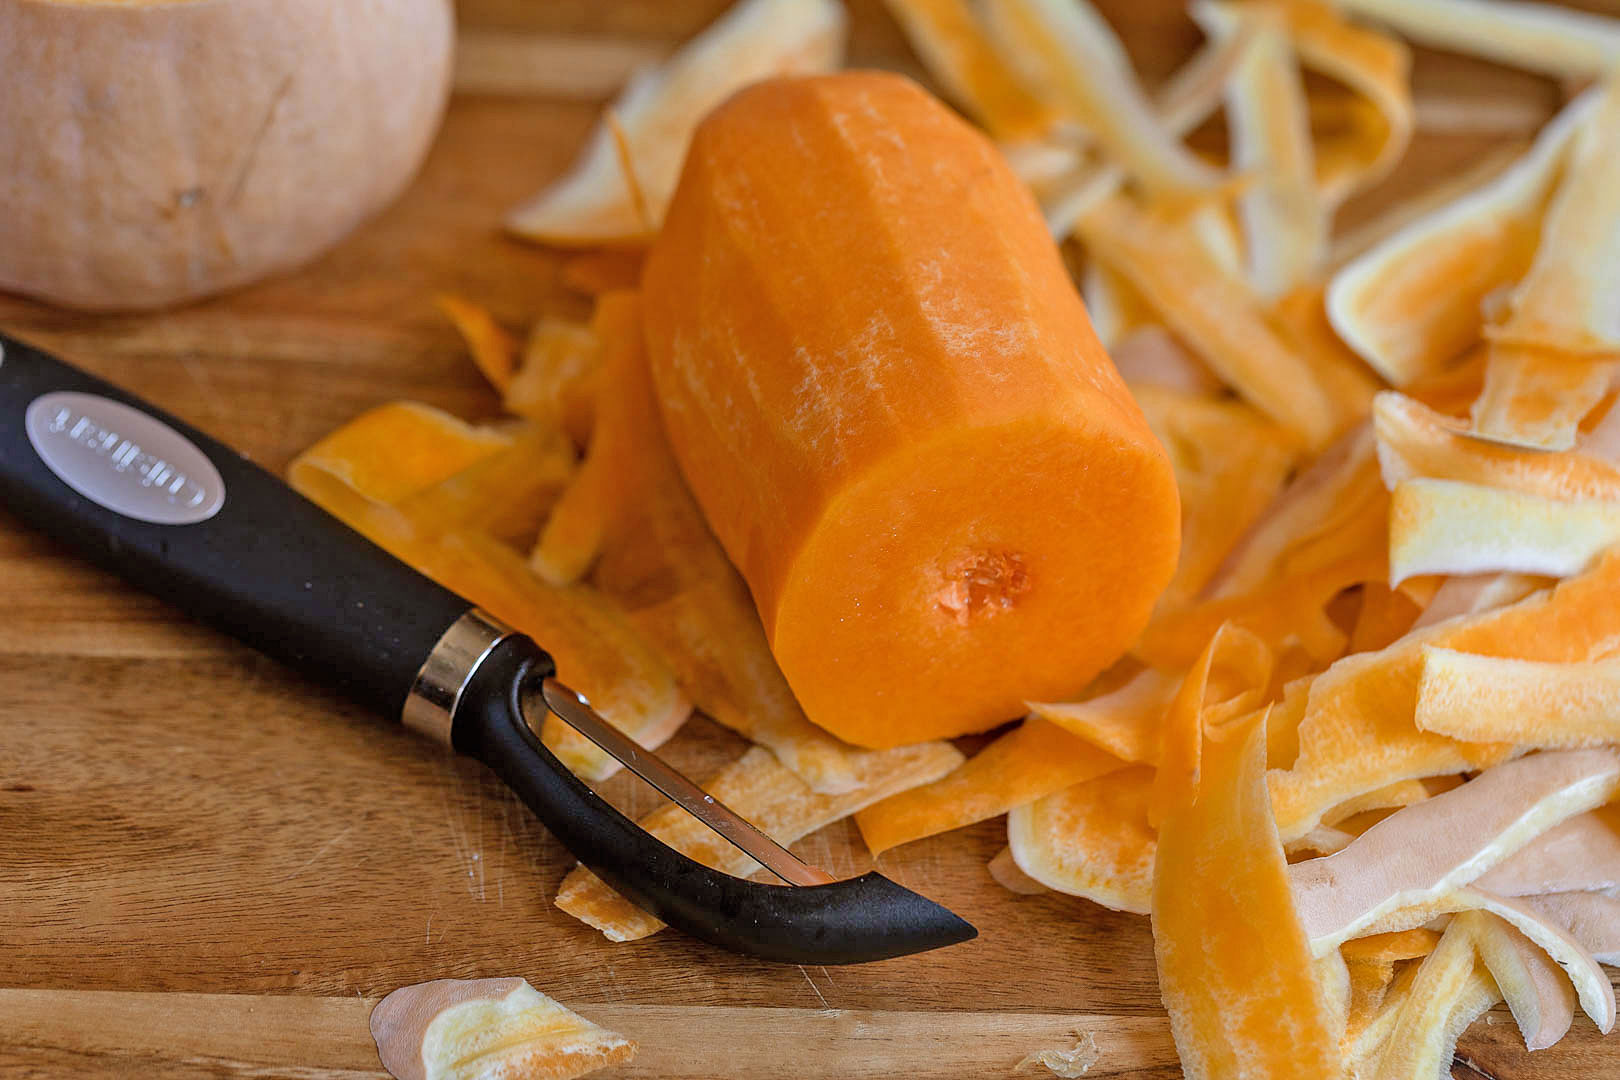 How to cook Butternut Squash